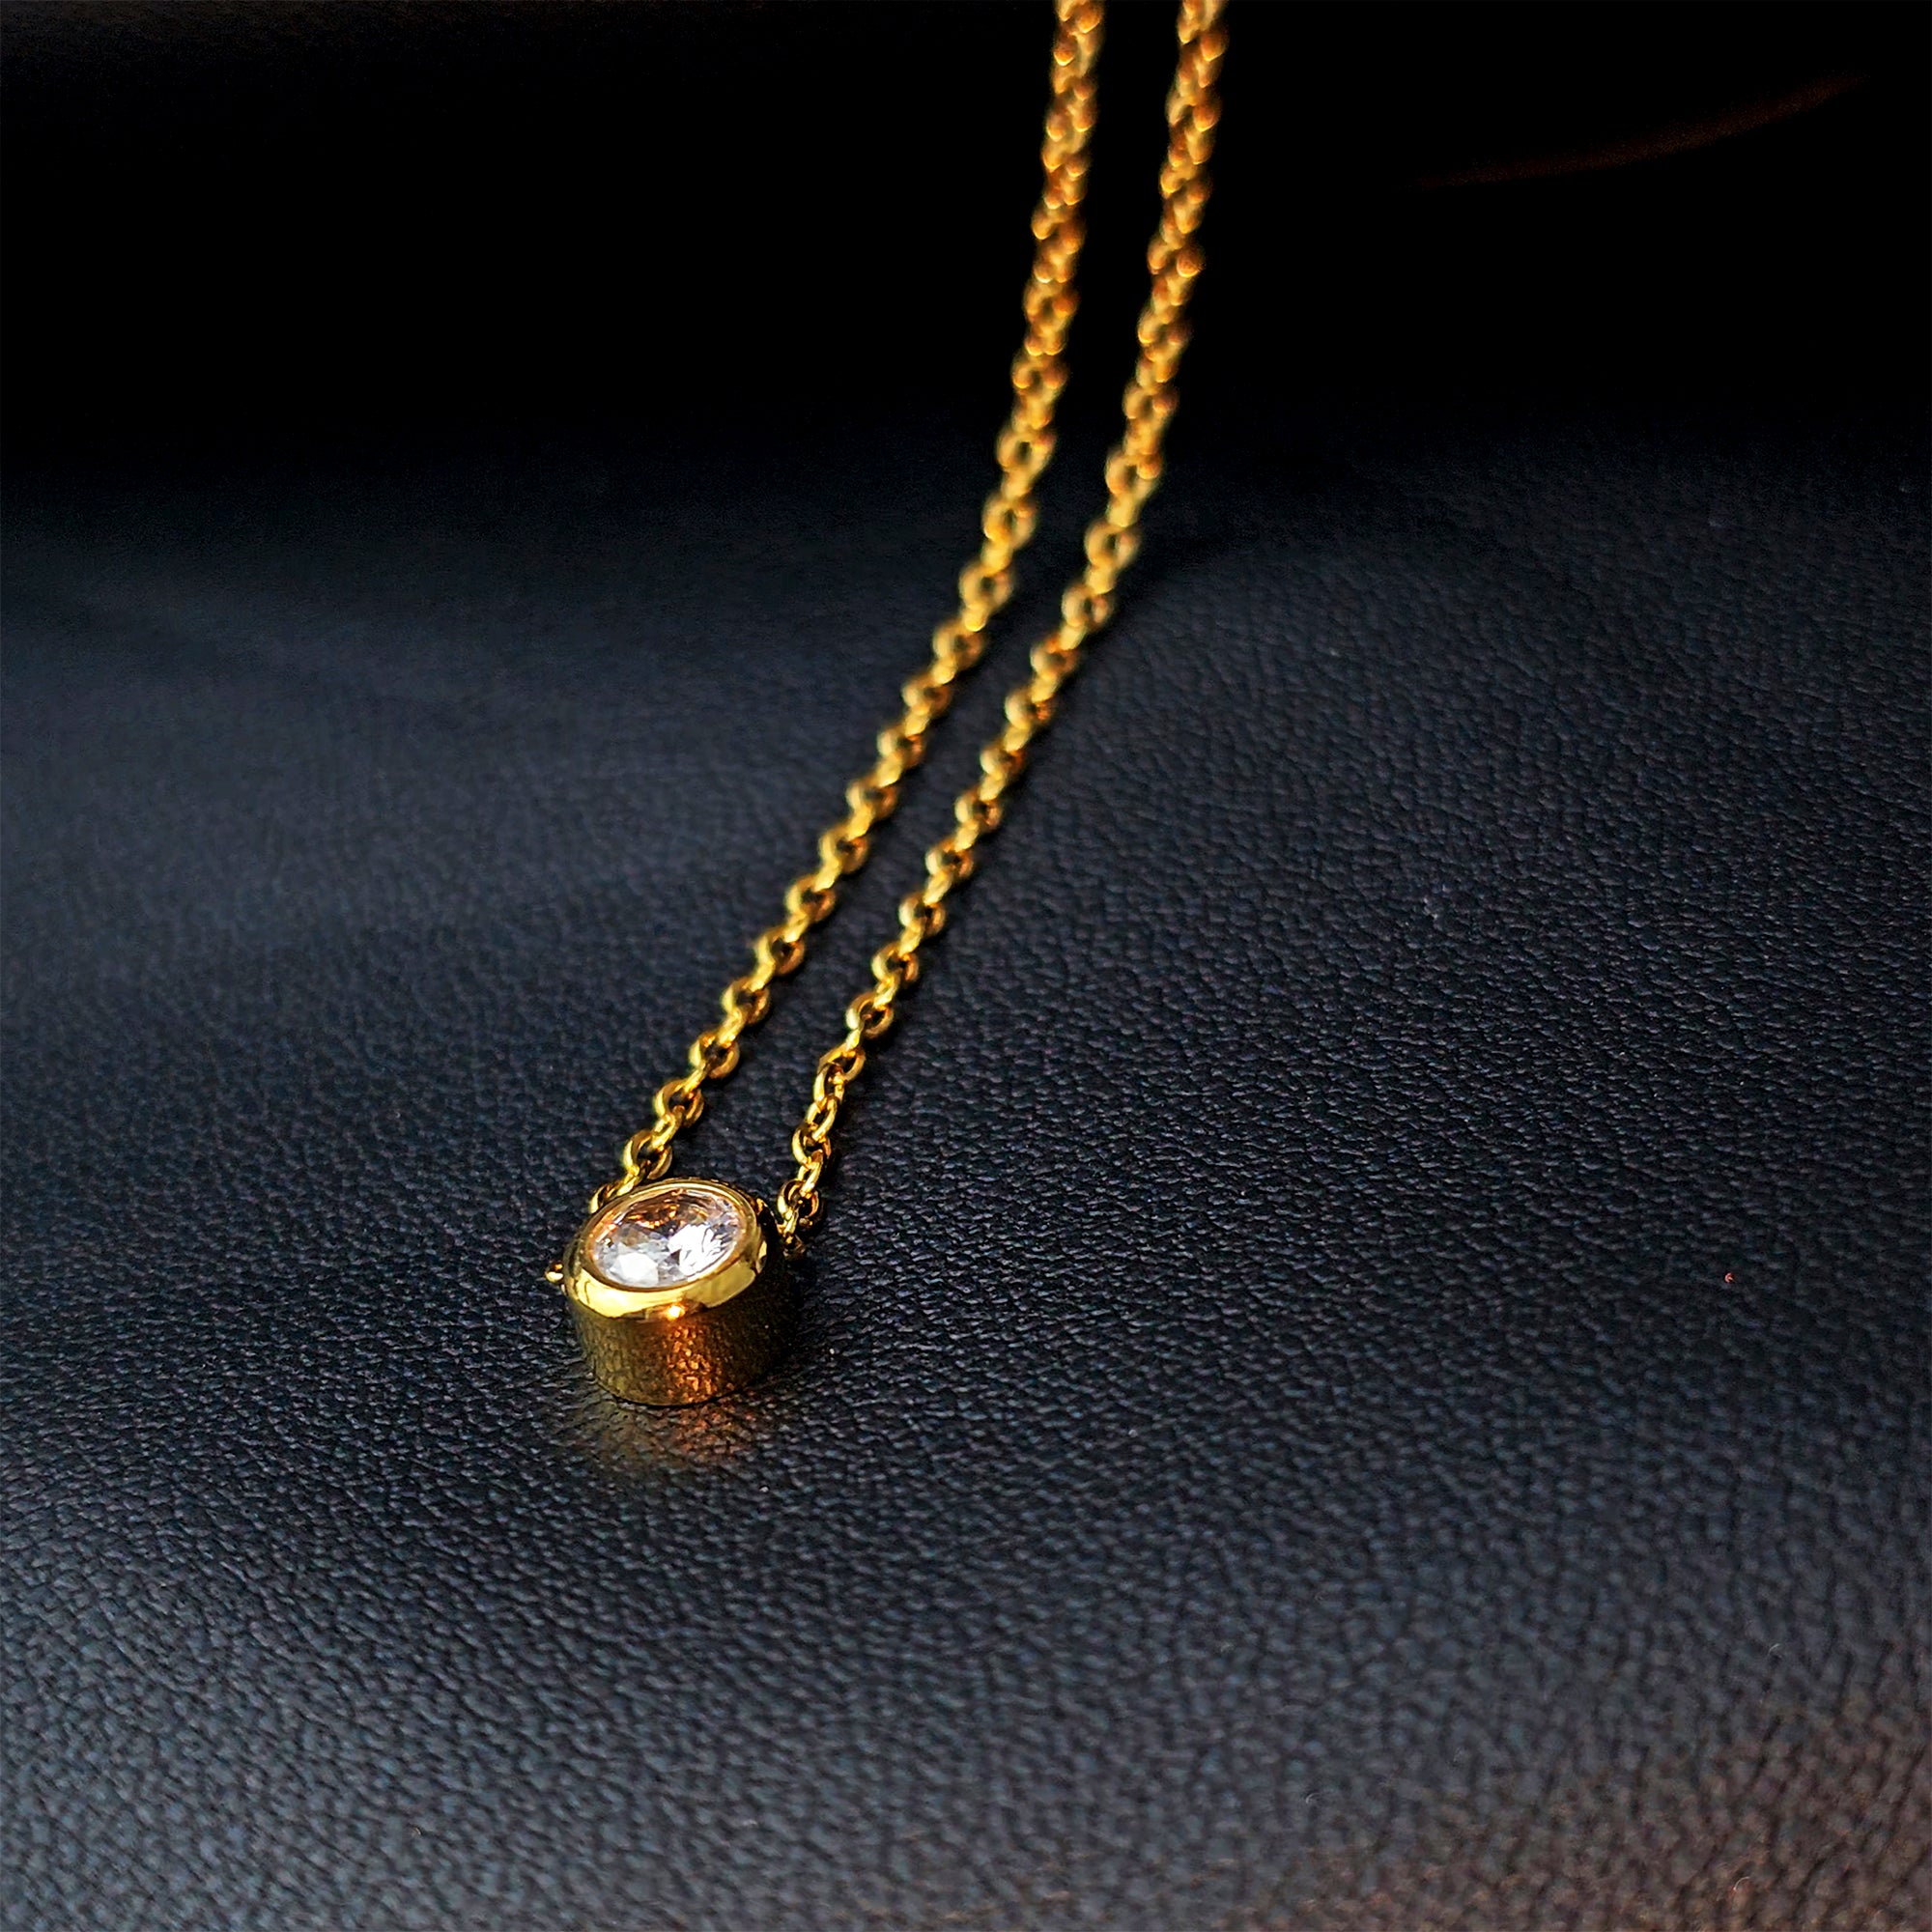 Stainless Steel Gold Tone PVD Chain Dainty Bezel CZ Pendant Necklace